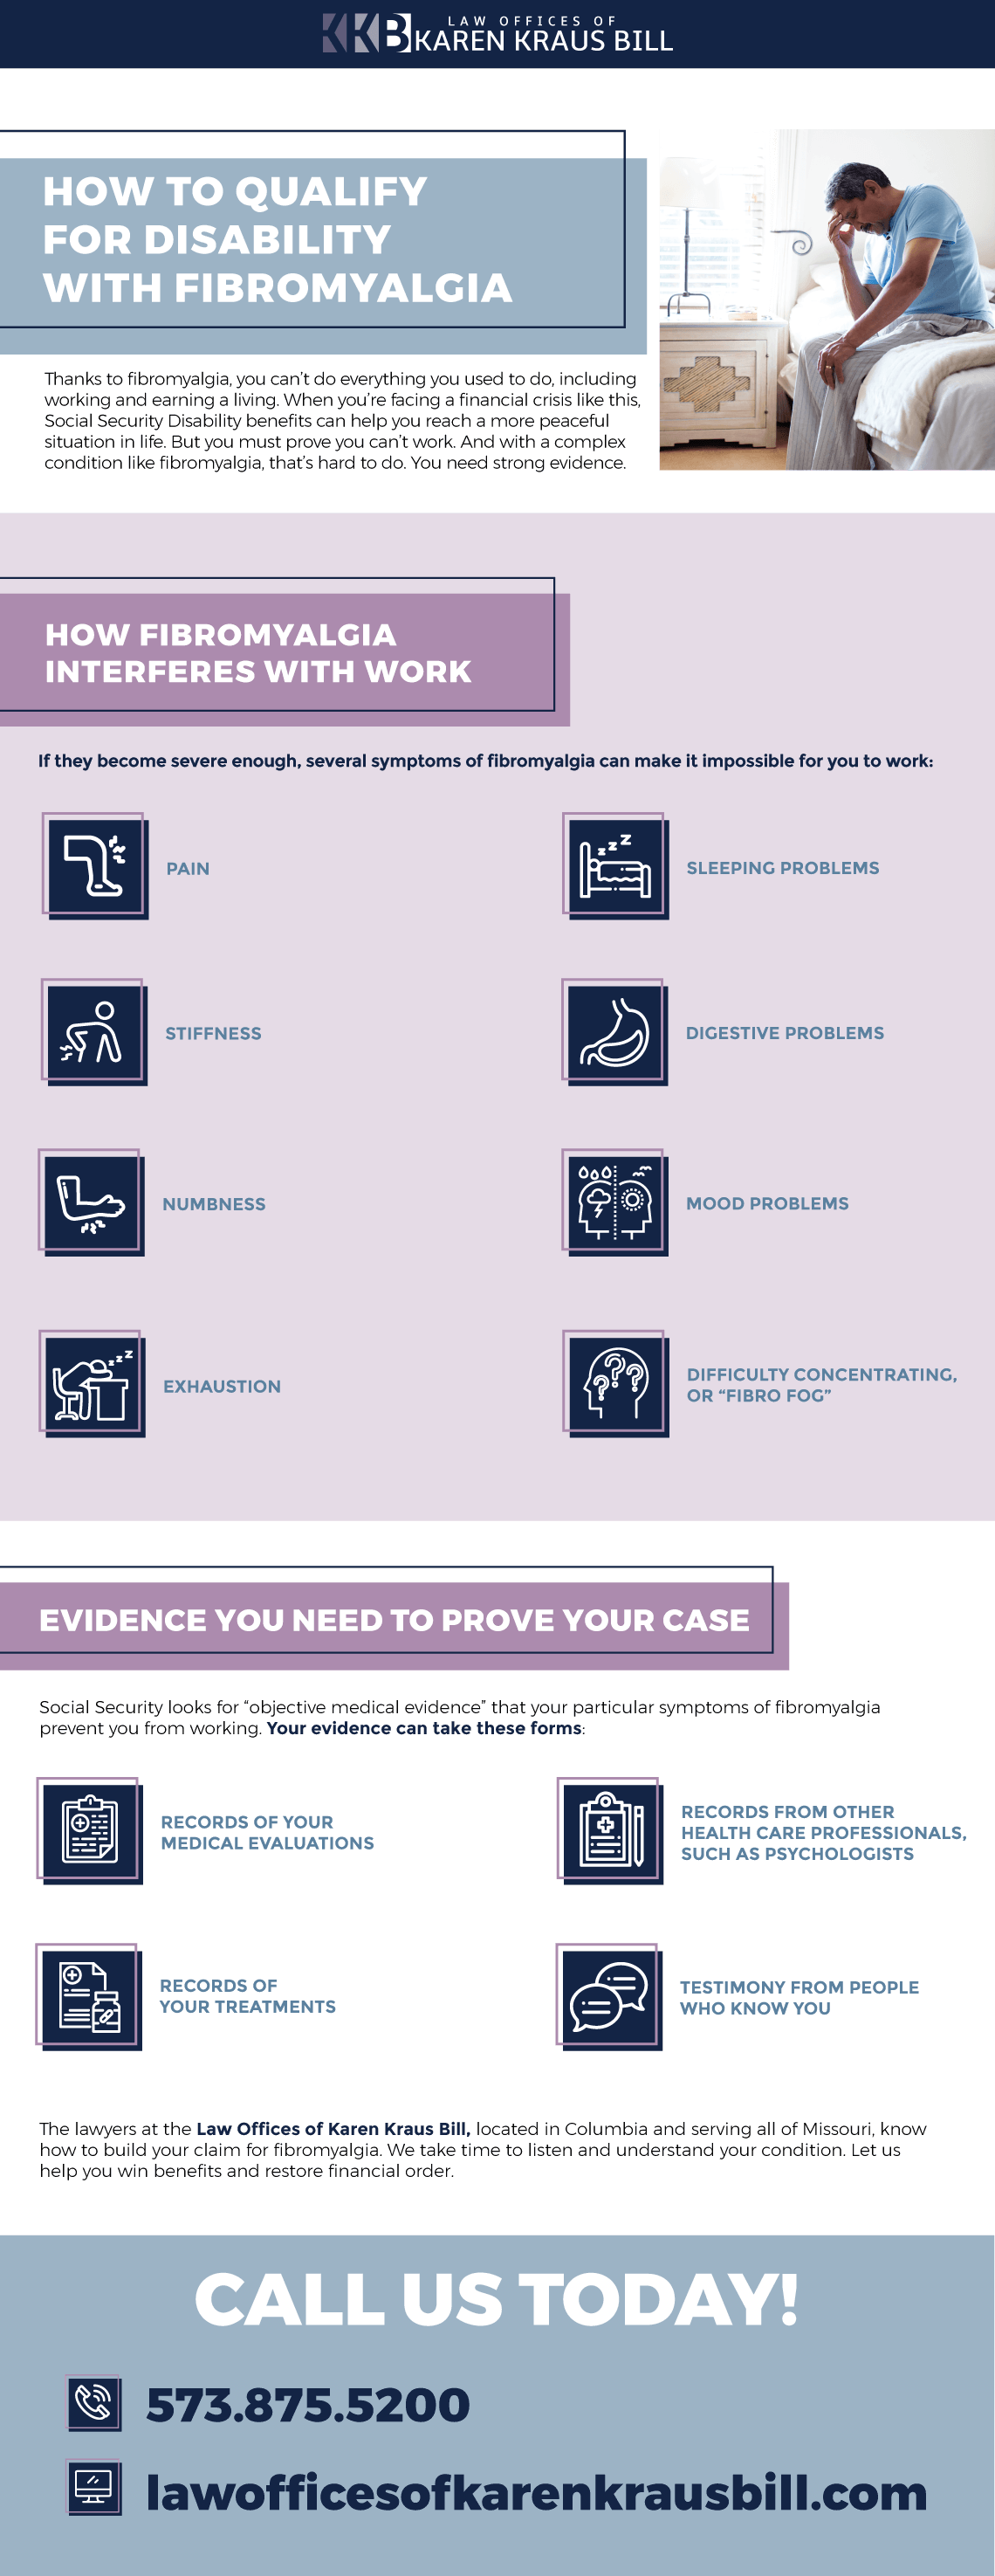 This is the How to Qualify for Disability with Fibromyalgia infographic